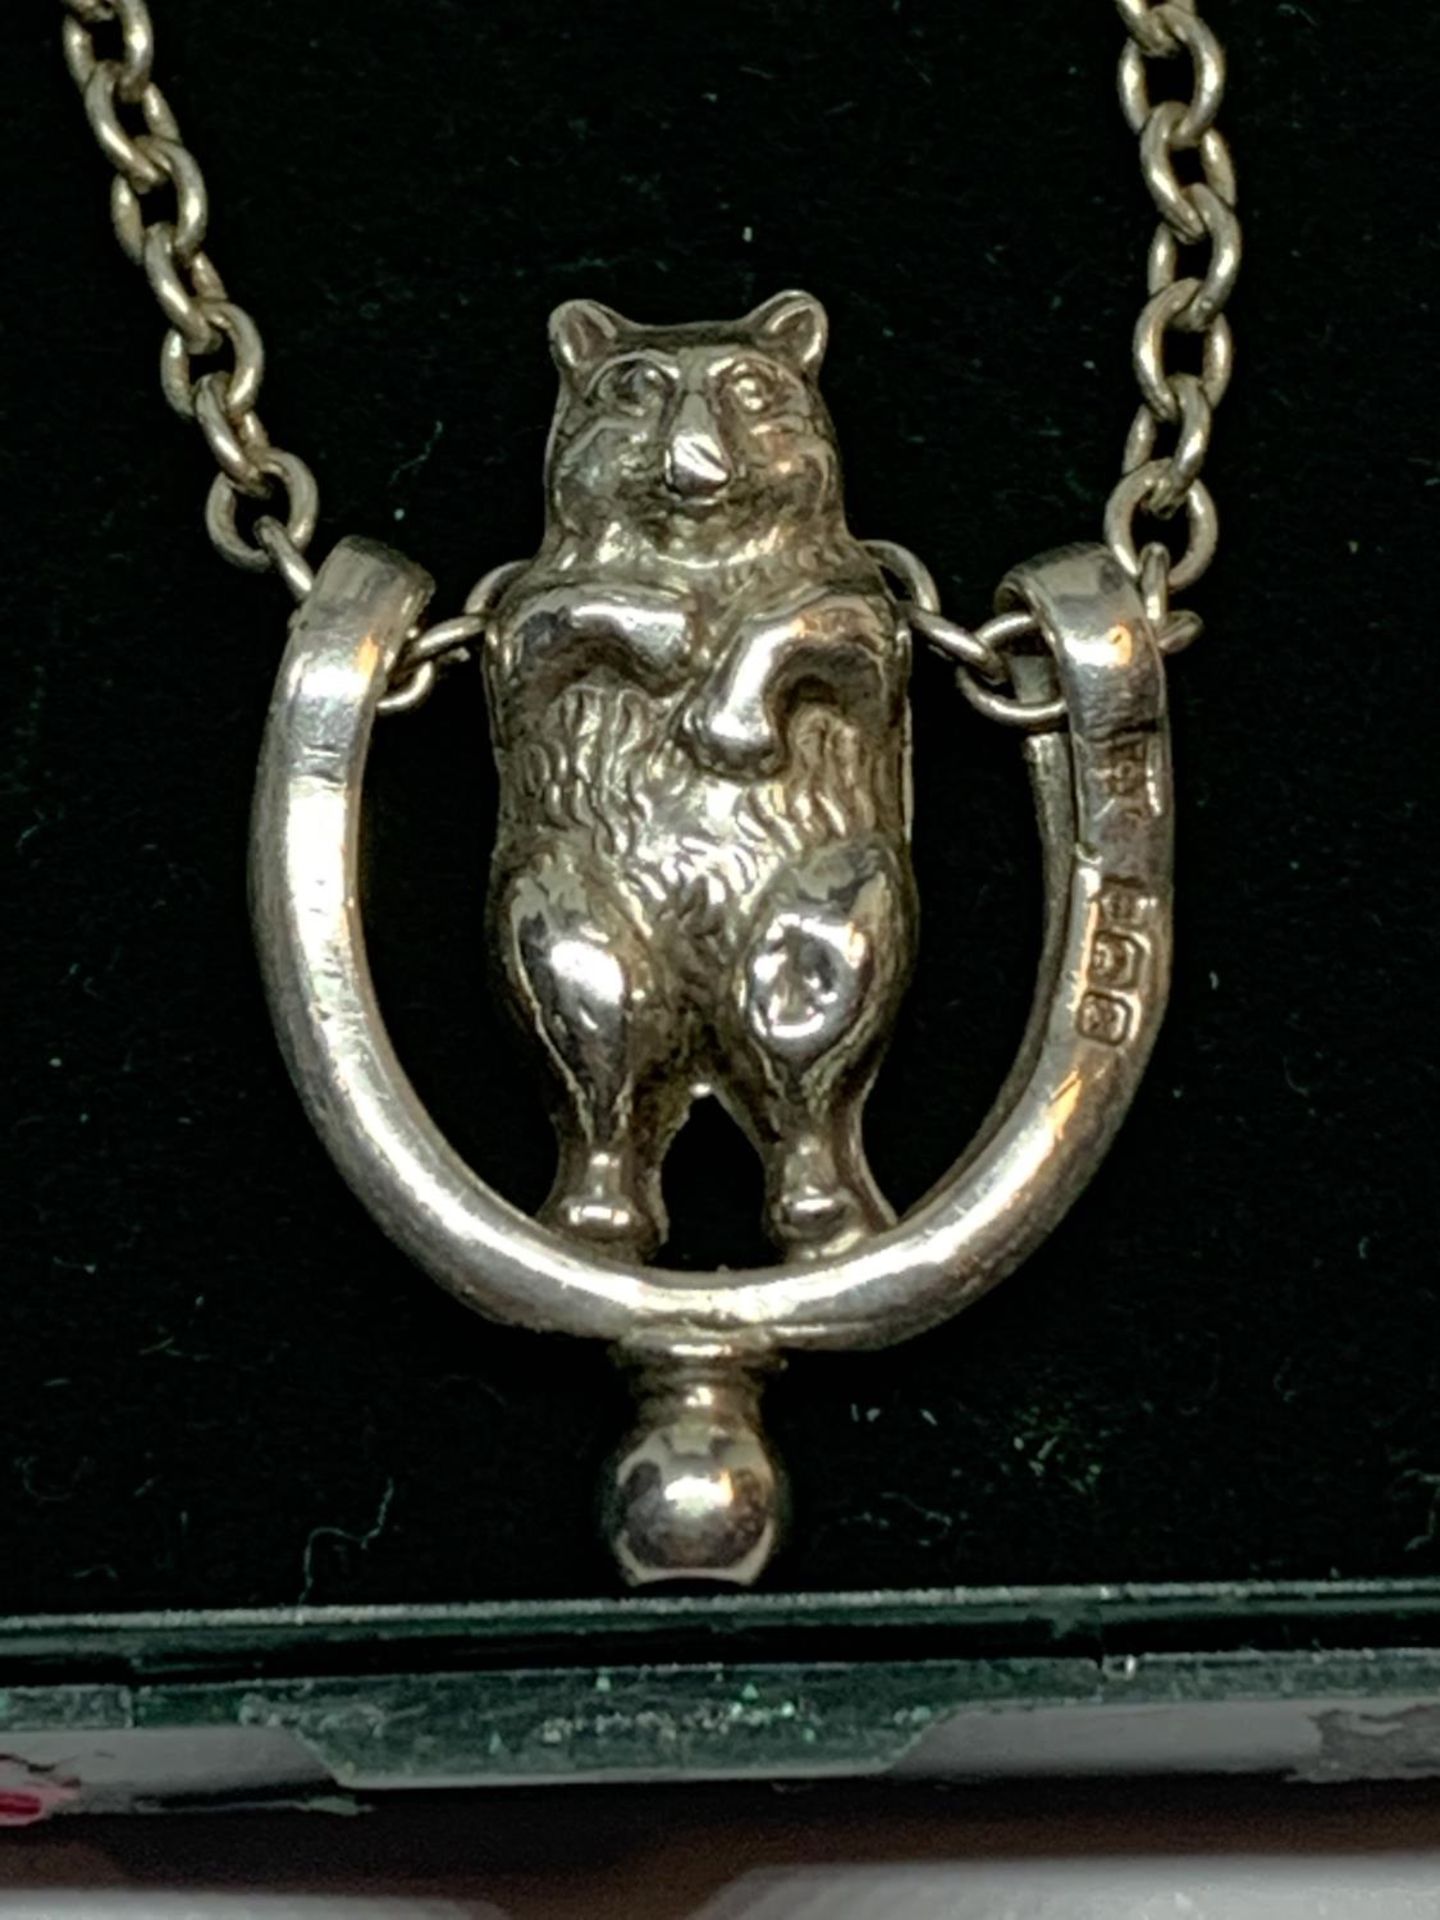 A SILVER NECKLACE WITH BEAR PENDANT IN A PRESENTATION BOX - Image 2 of 3